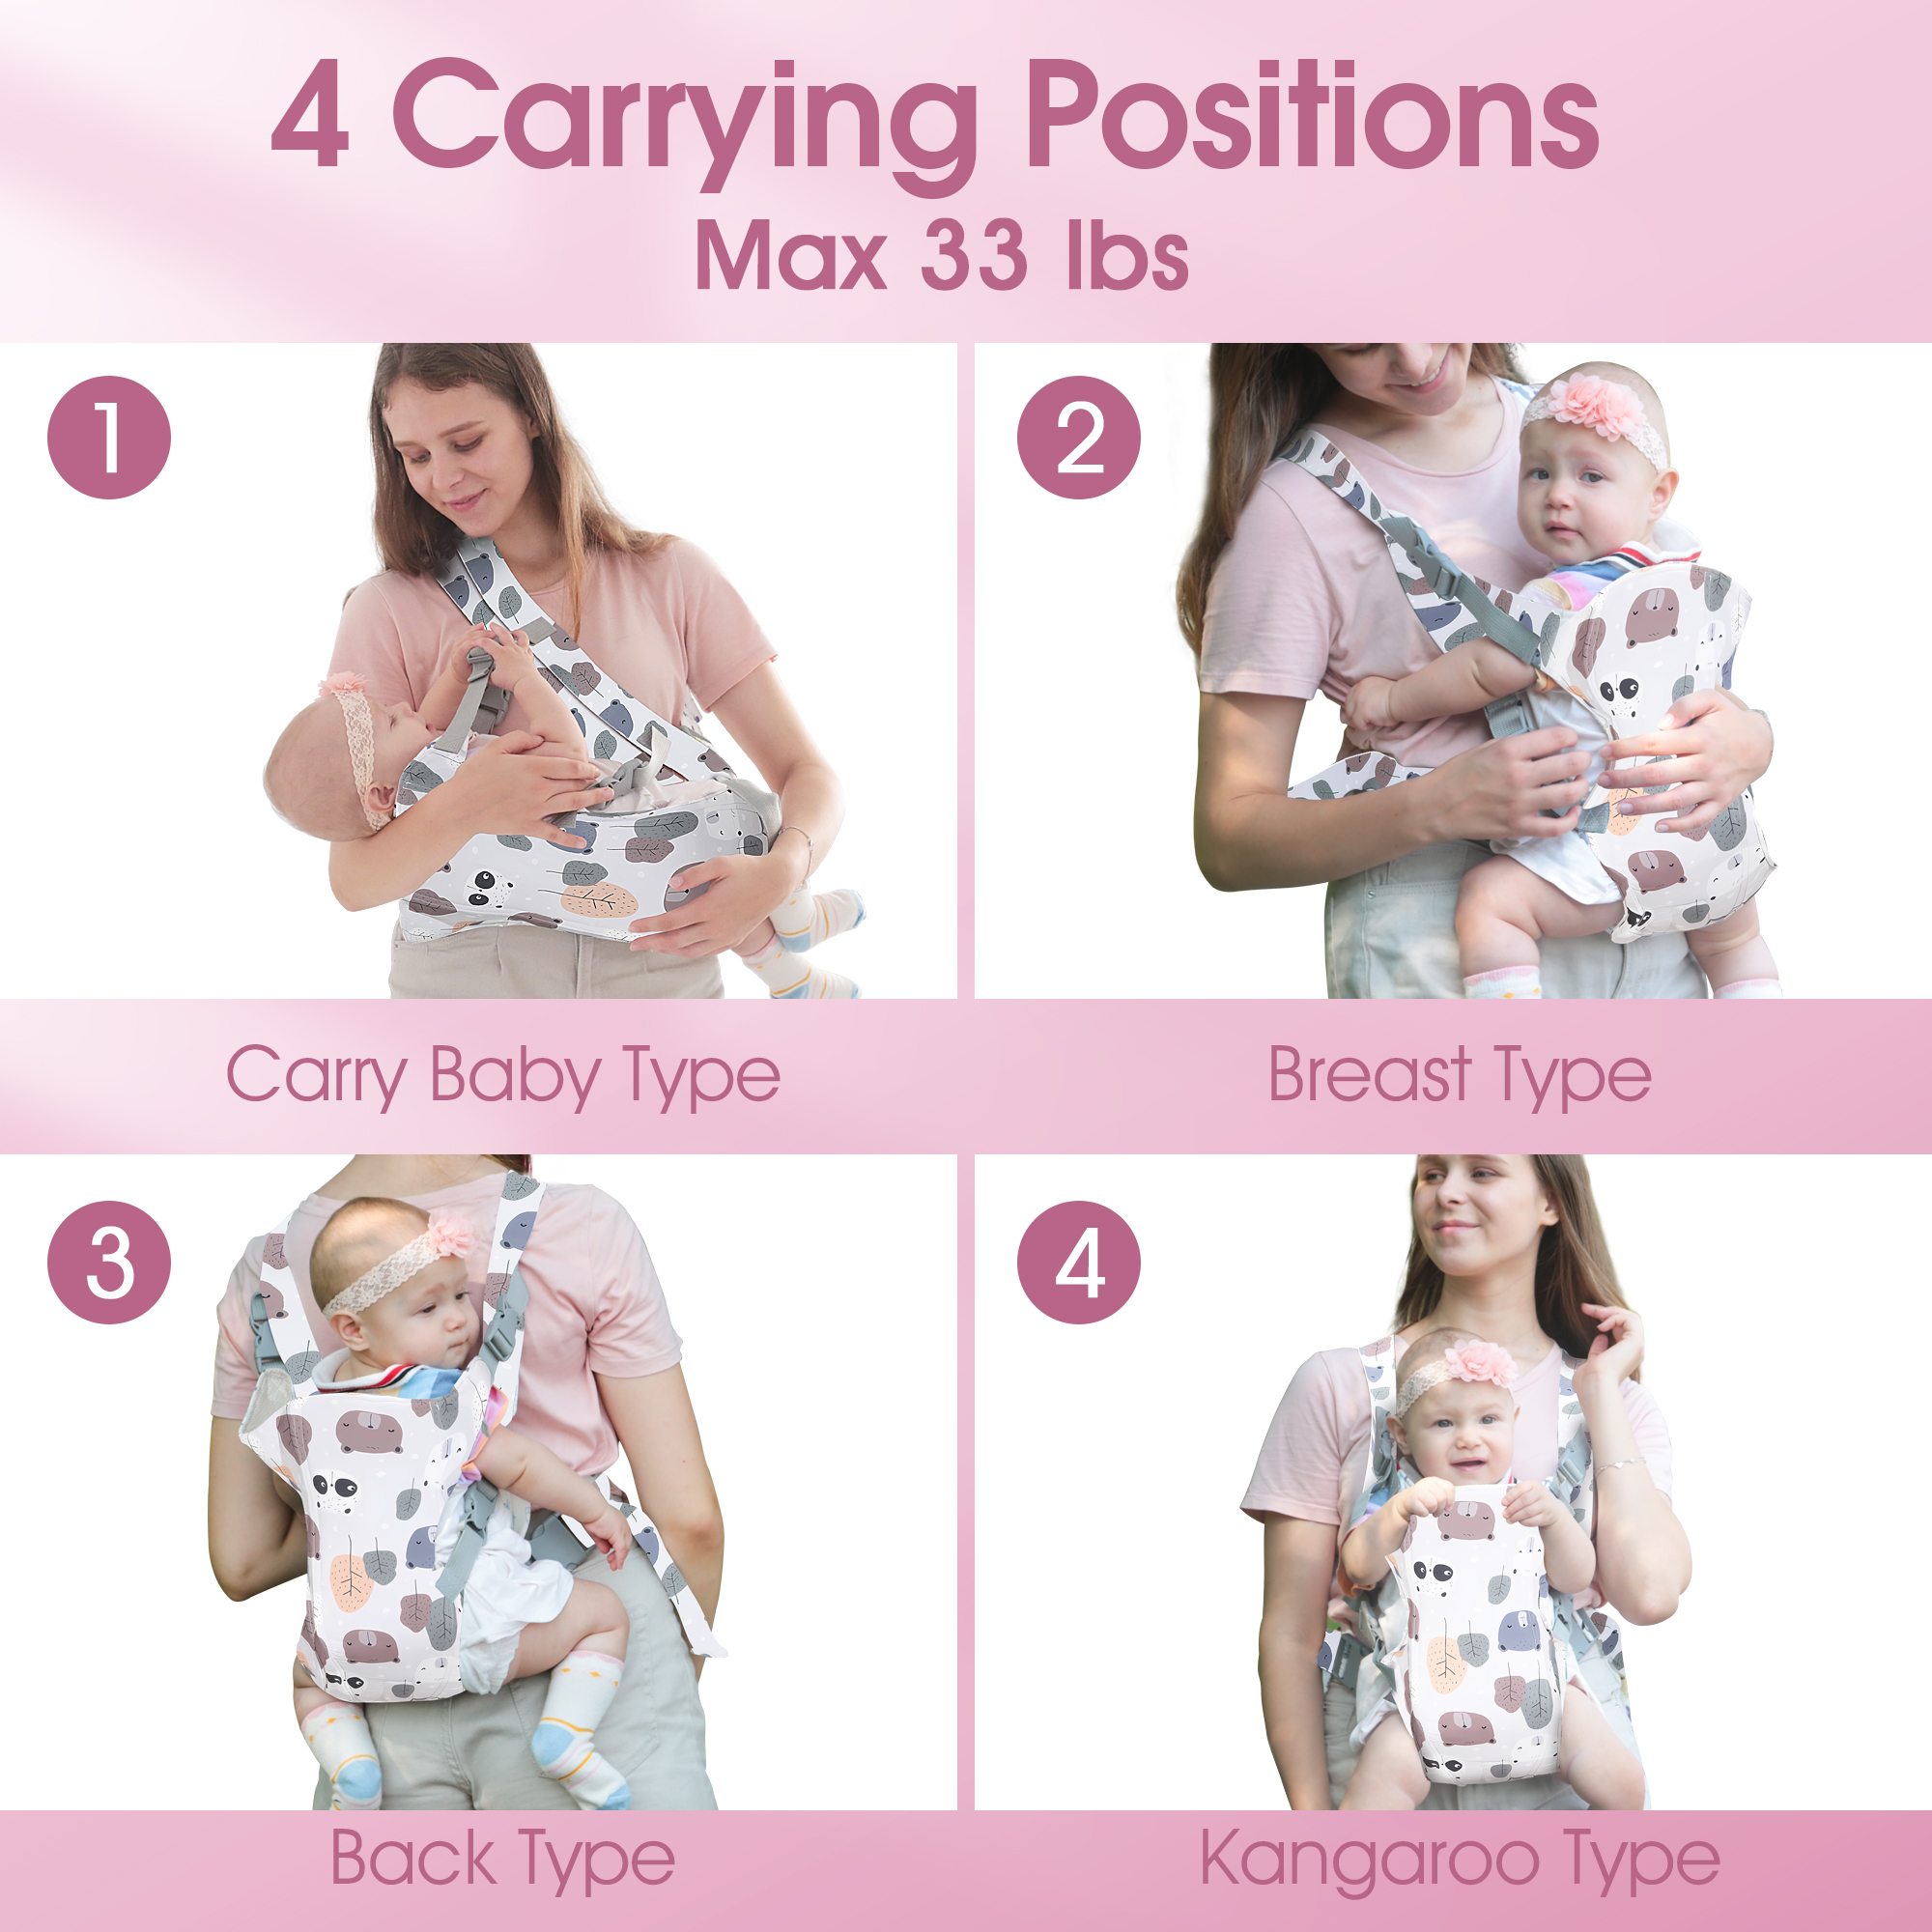 4 in 1 Baby Carrier, Infant Wraps Carrier Ergonomic Baby Carrier Backpack, Newborn Carrier for Baby Carrier Newborn to Toddler, Colorful - image 4 of 8